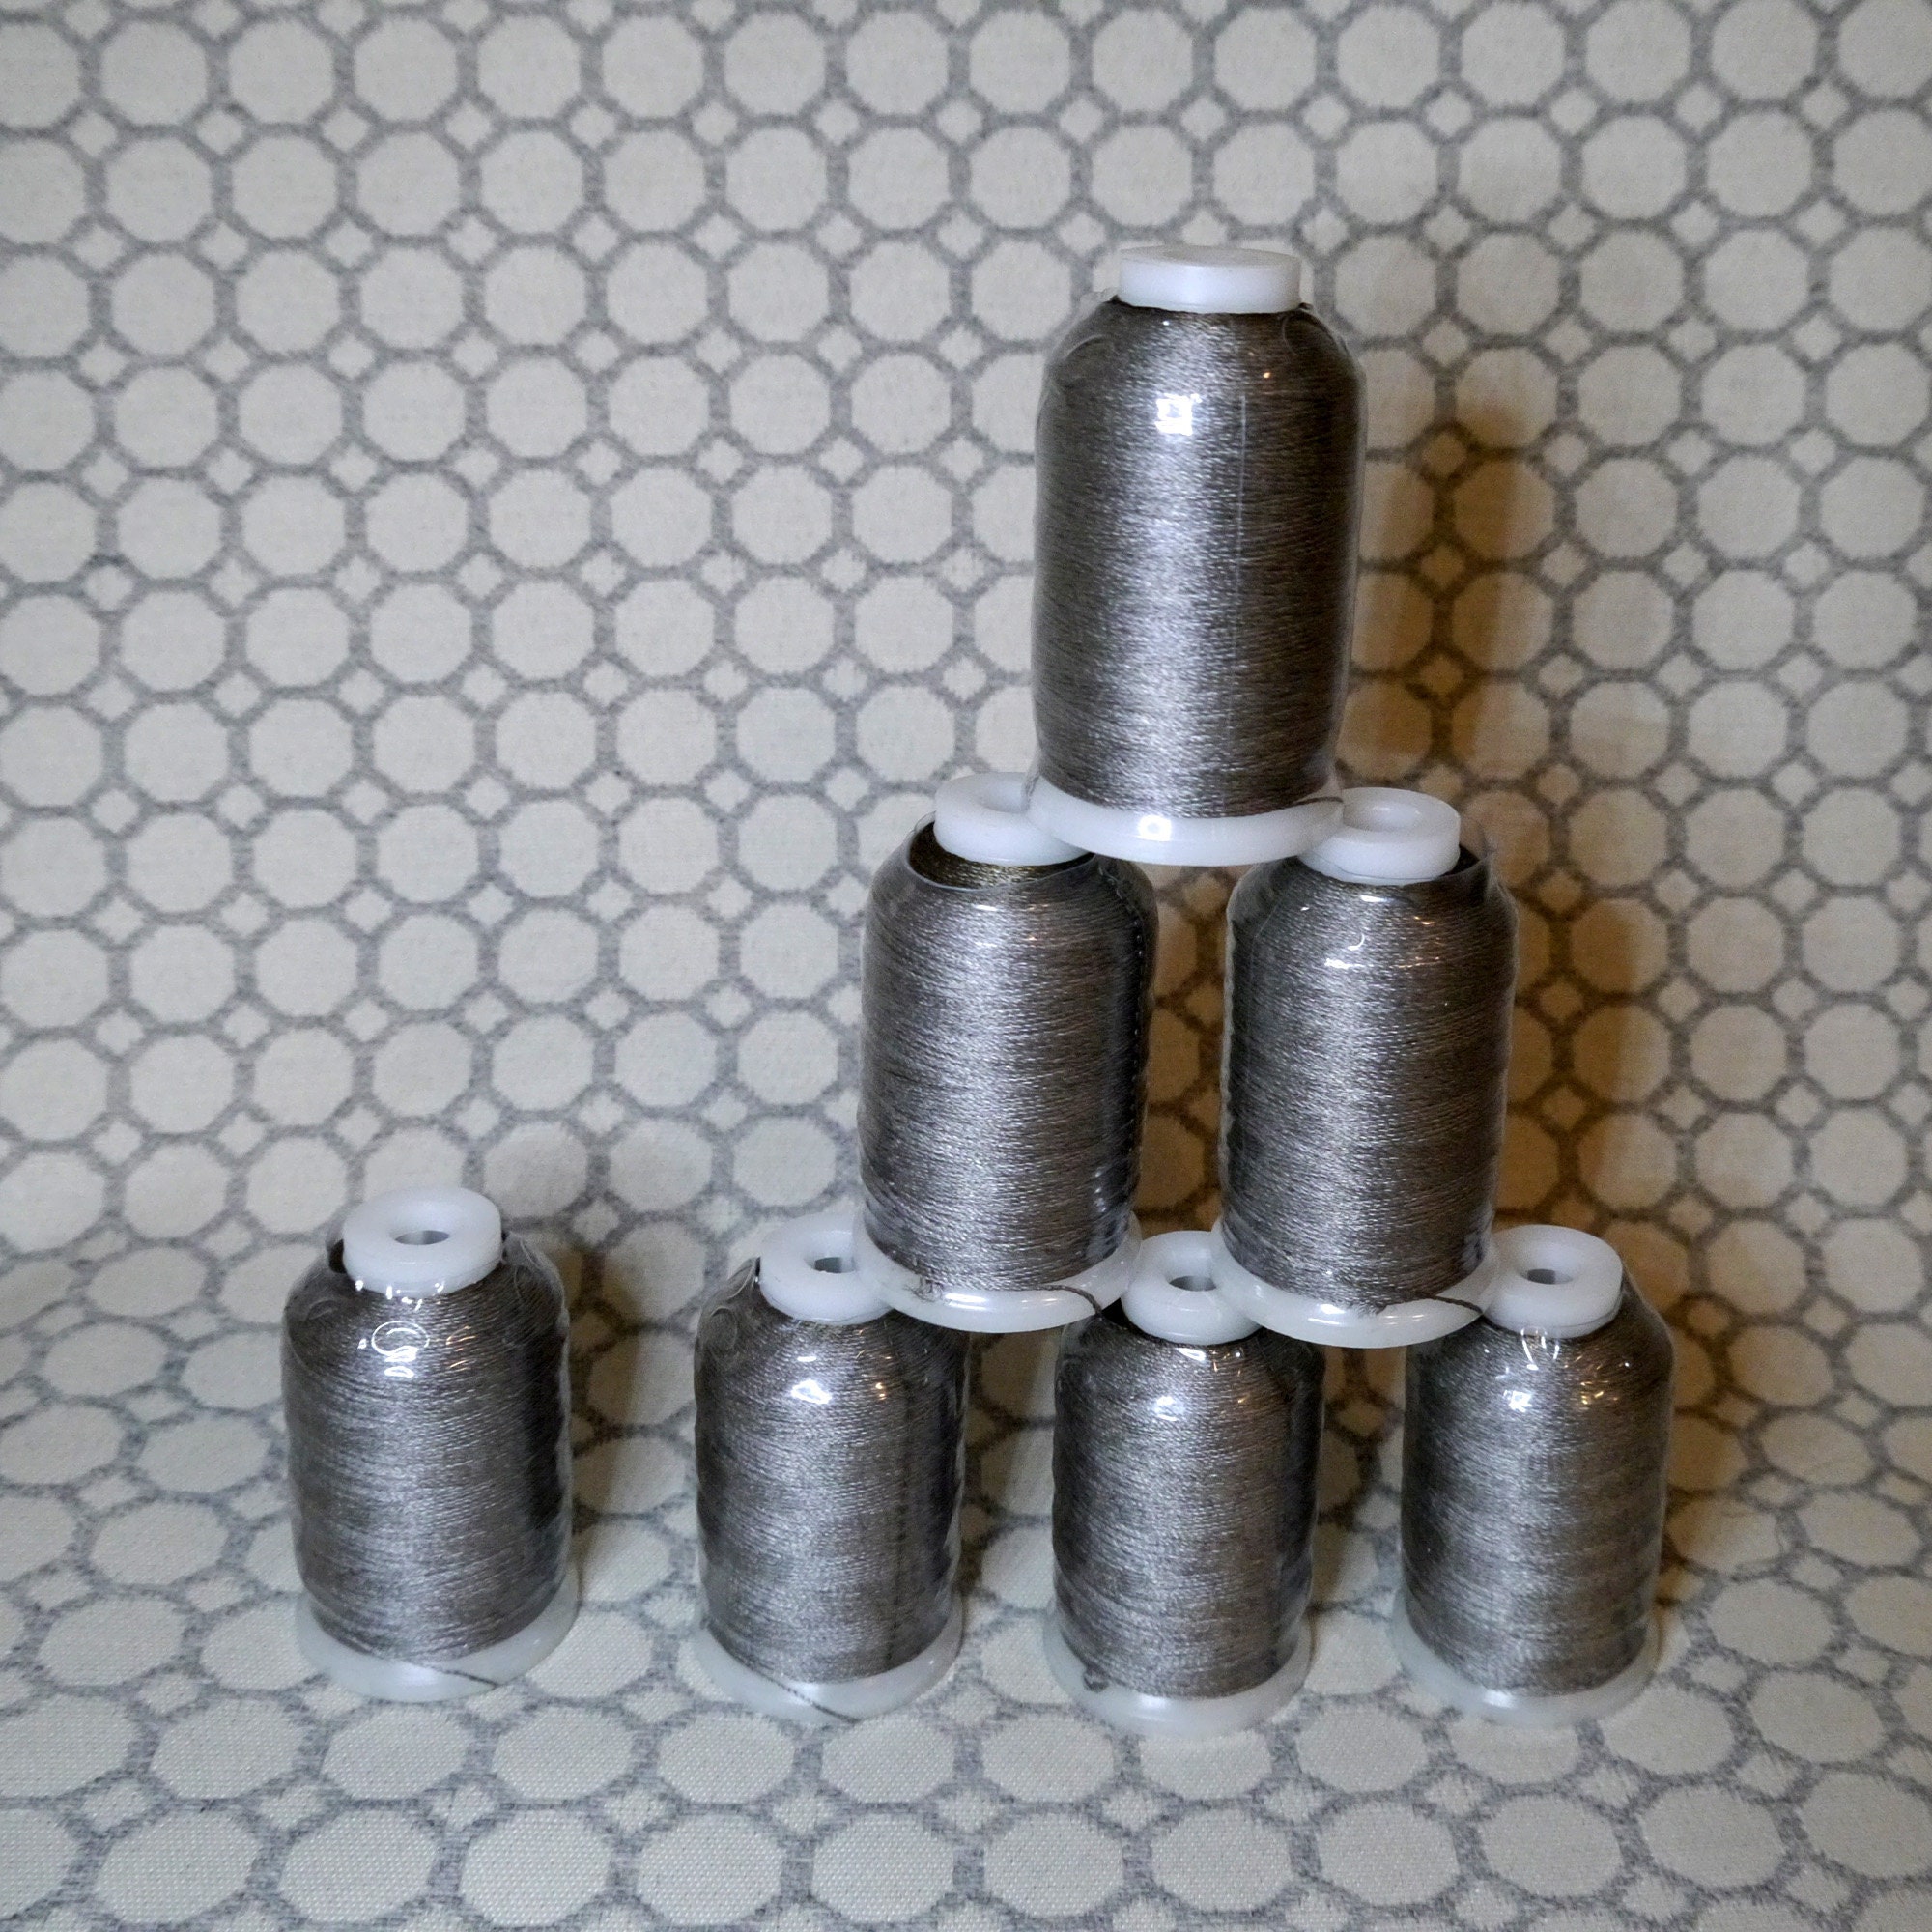 Conductive sewing & embroidery thread: Silver-tech